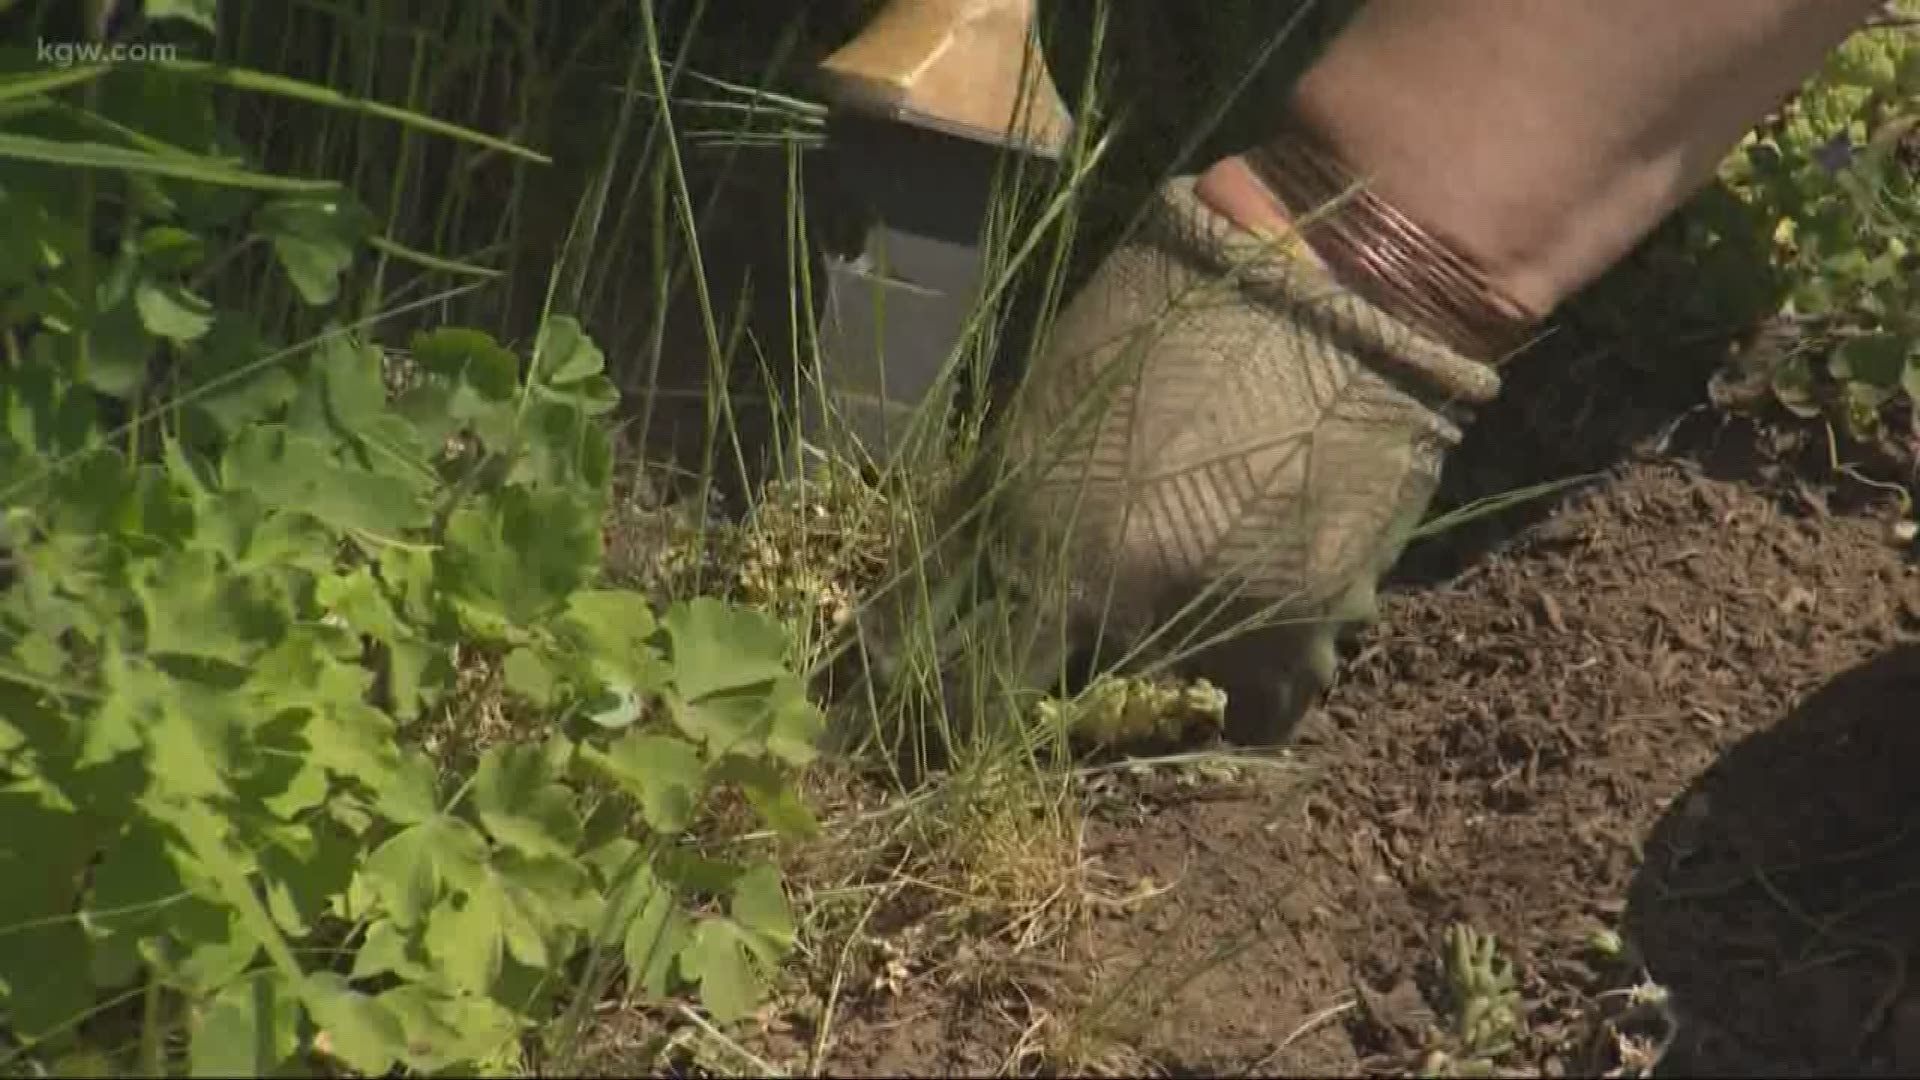 Green thumbs try to make it through dry May